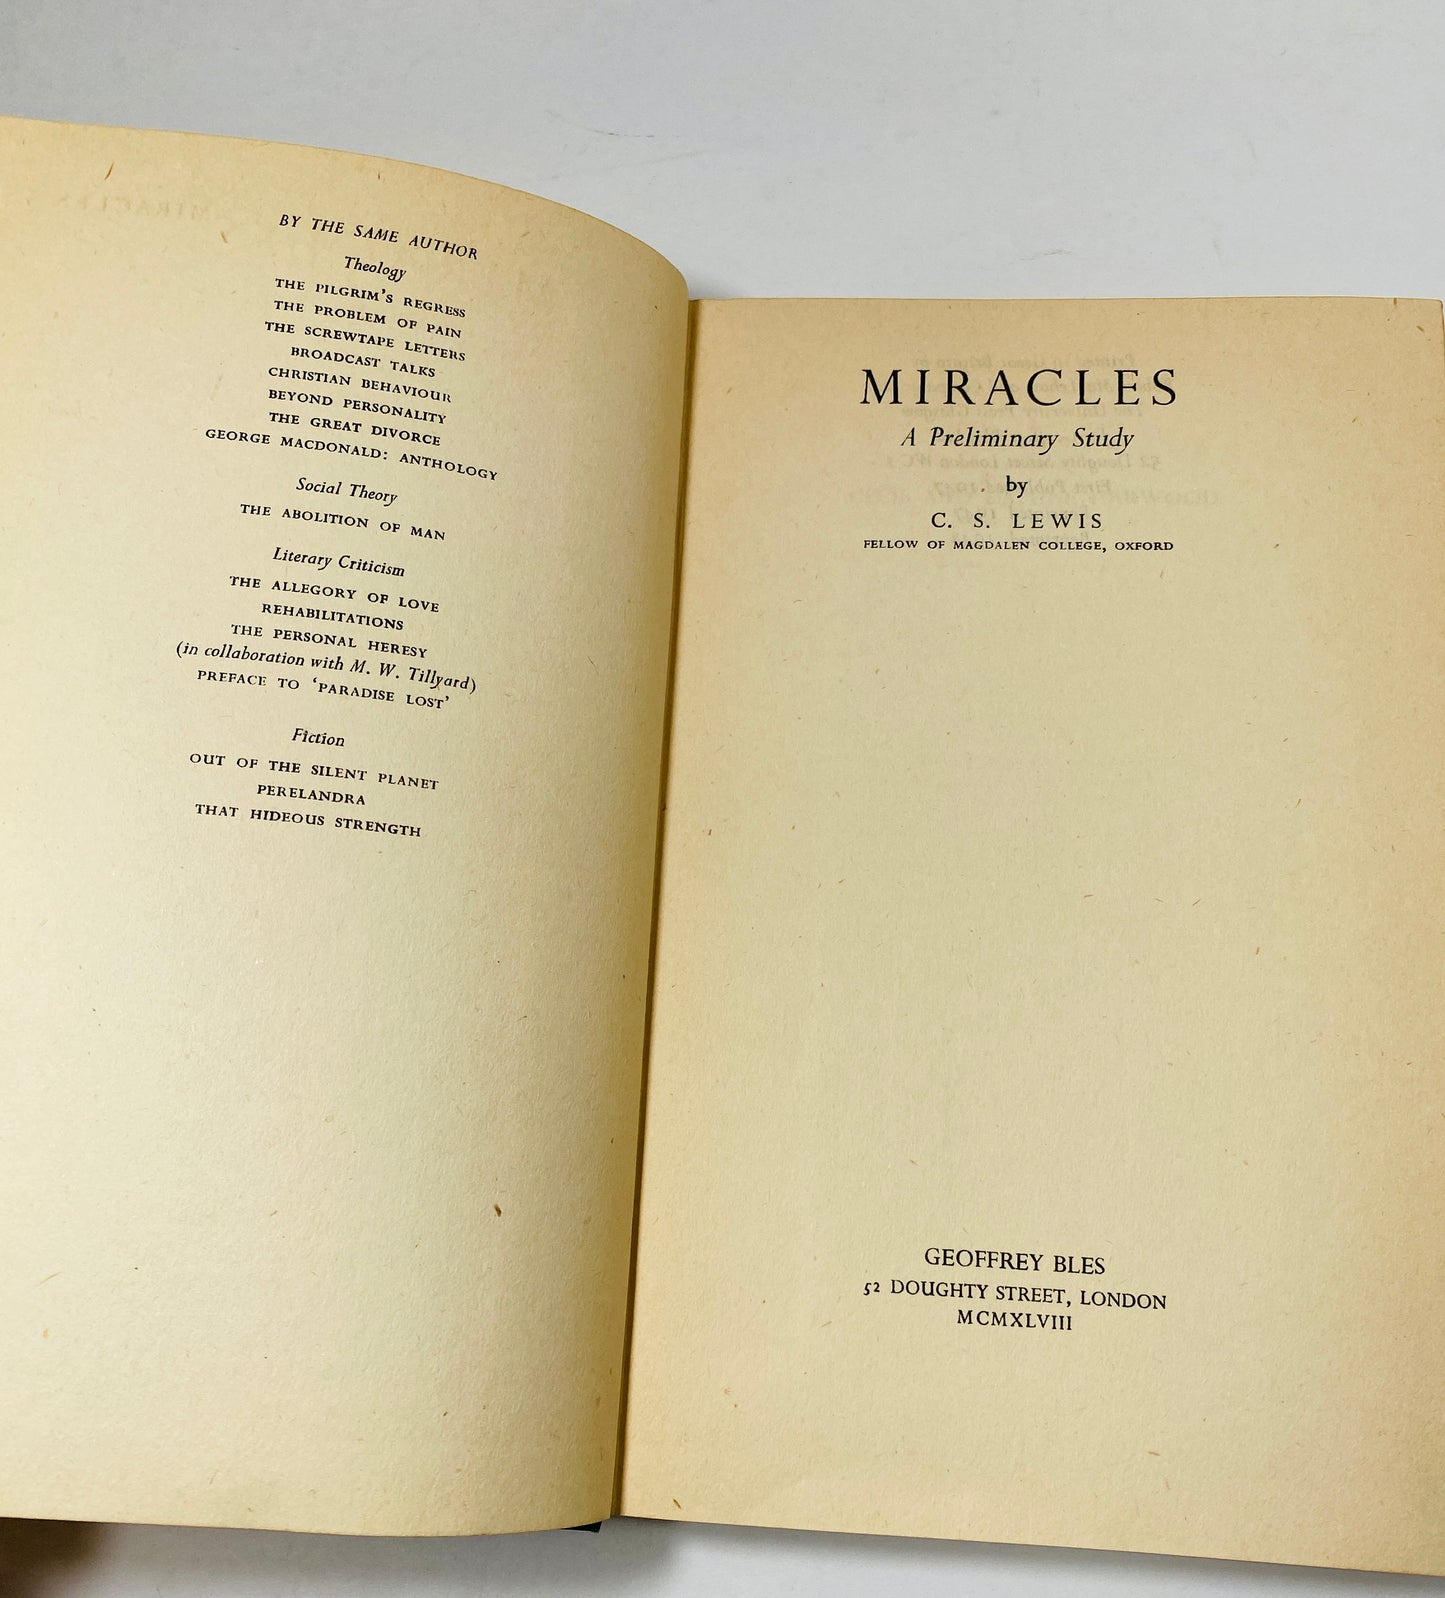 1948 Miracles by CS Lewis vintage book EARLY PRINTING about Christianity and God's intervention in nature Preliminary Study Geoffrey Bles